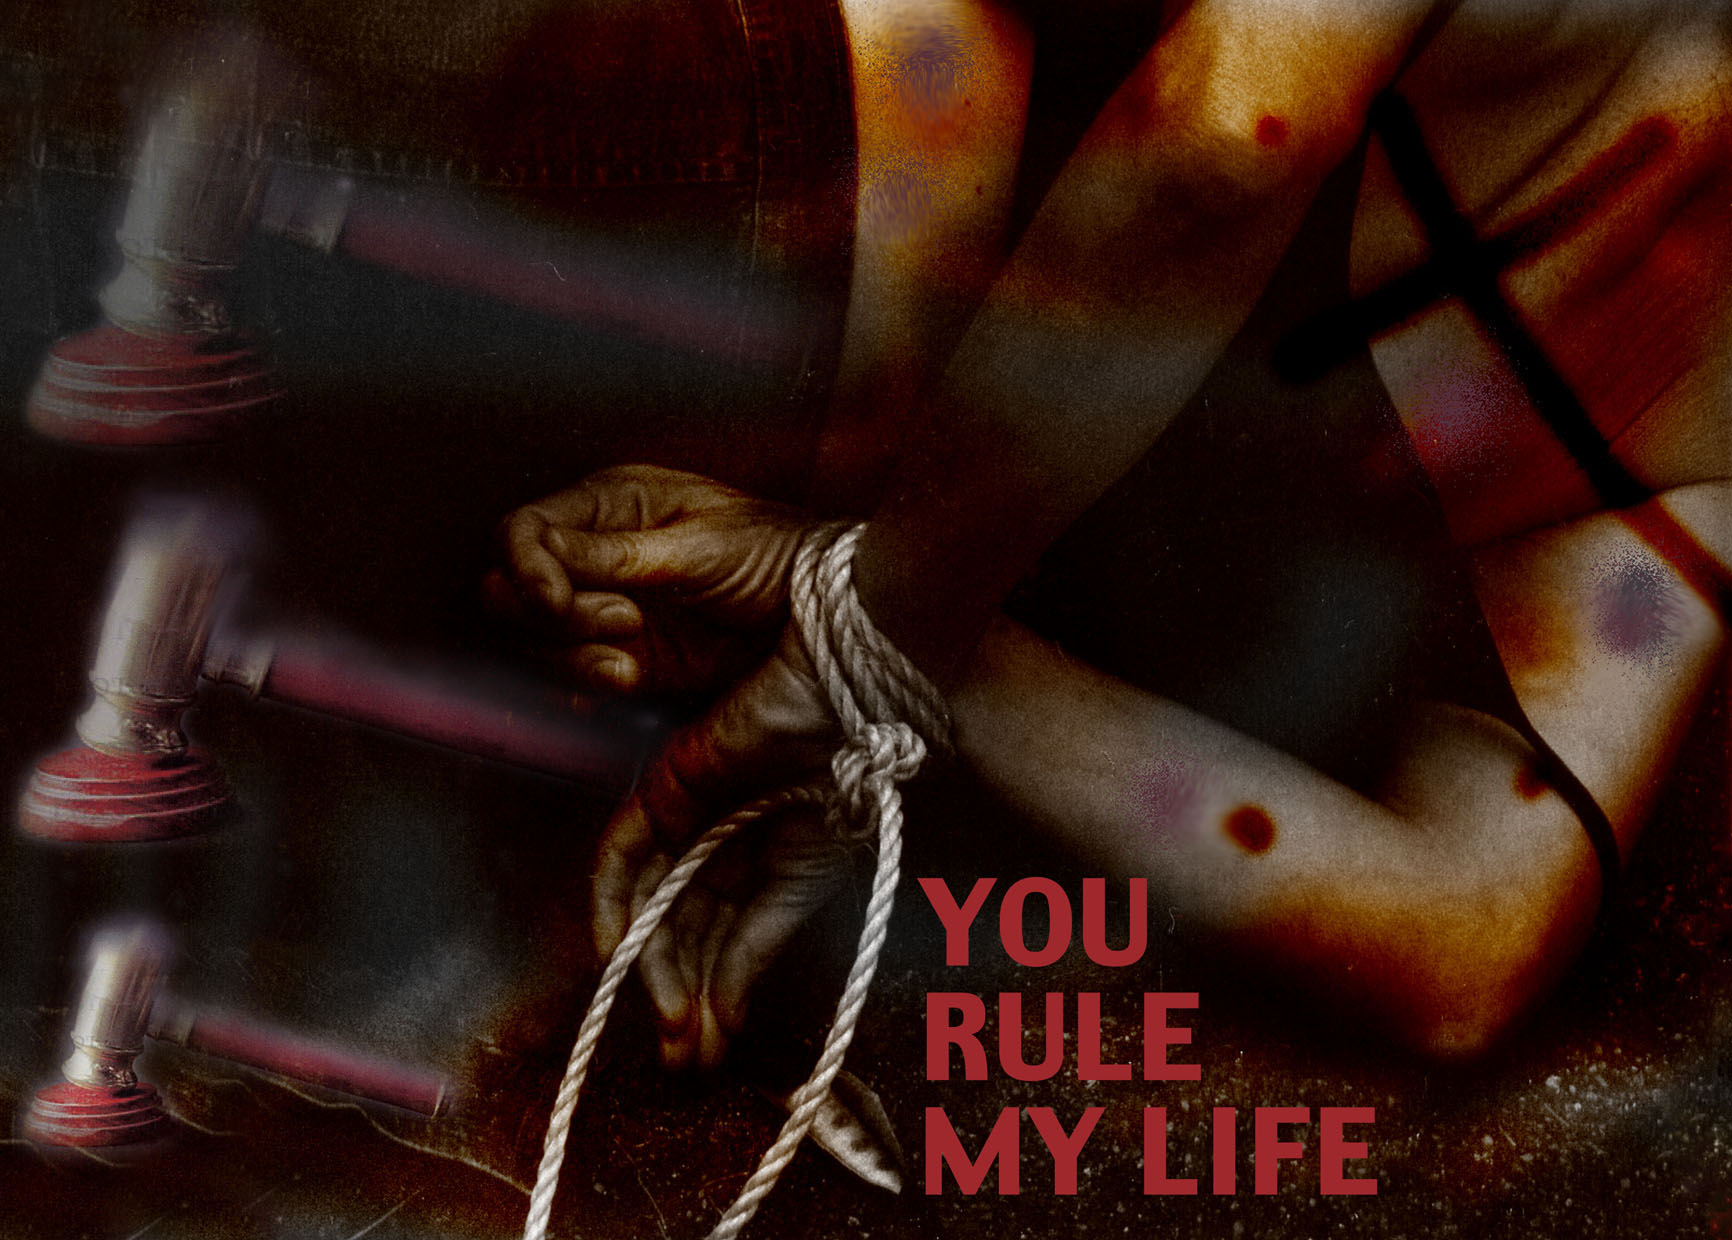 You Rule My Life: digital image exploring domestic violence against women and its composite abusive judicial system